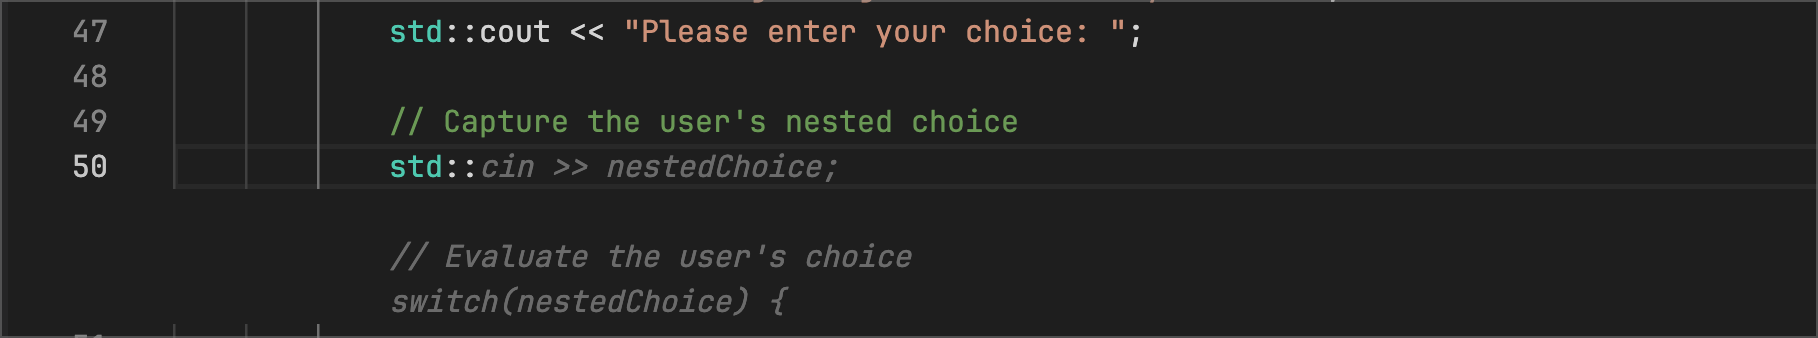 adventure.cpp - I added an end line to prompt Code Suggestions to break the choices into end line outputs